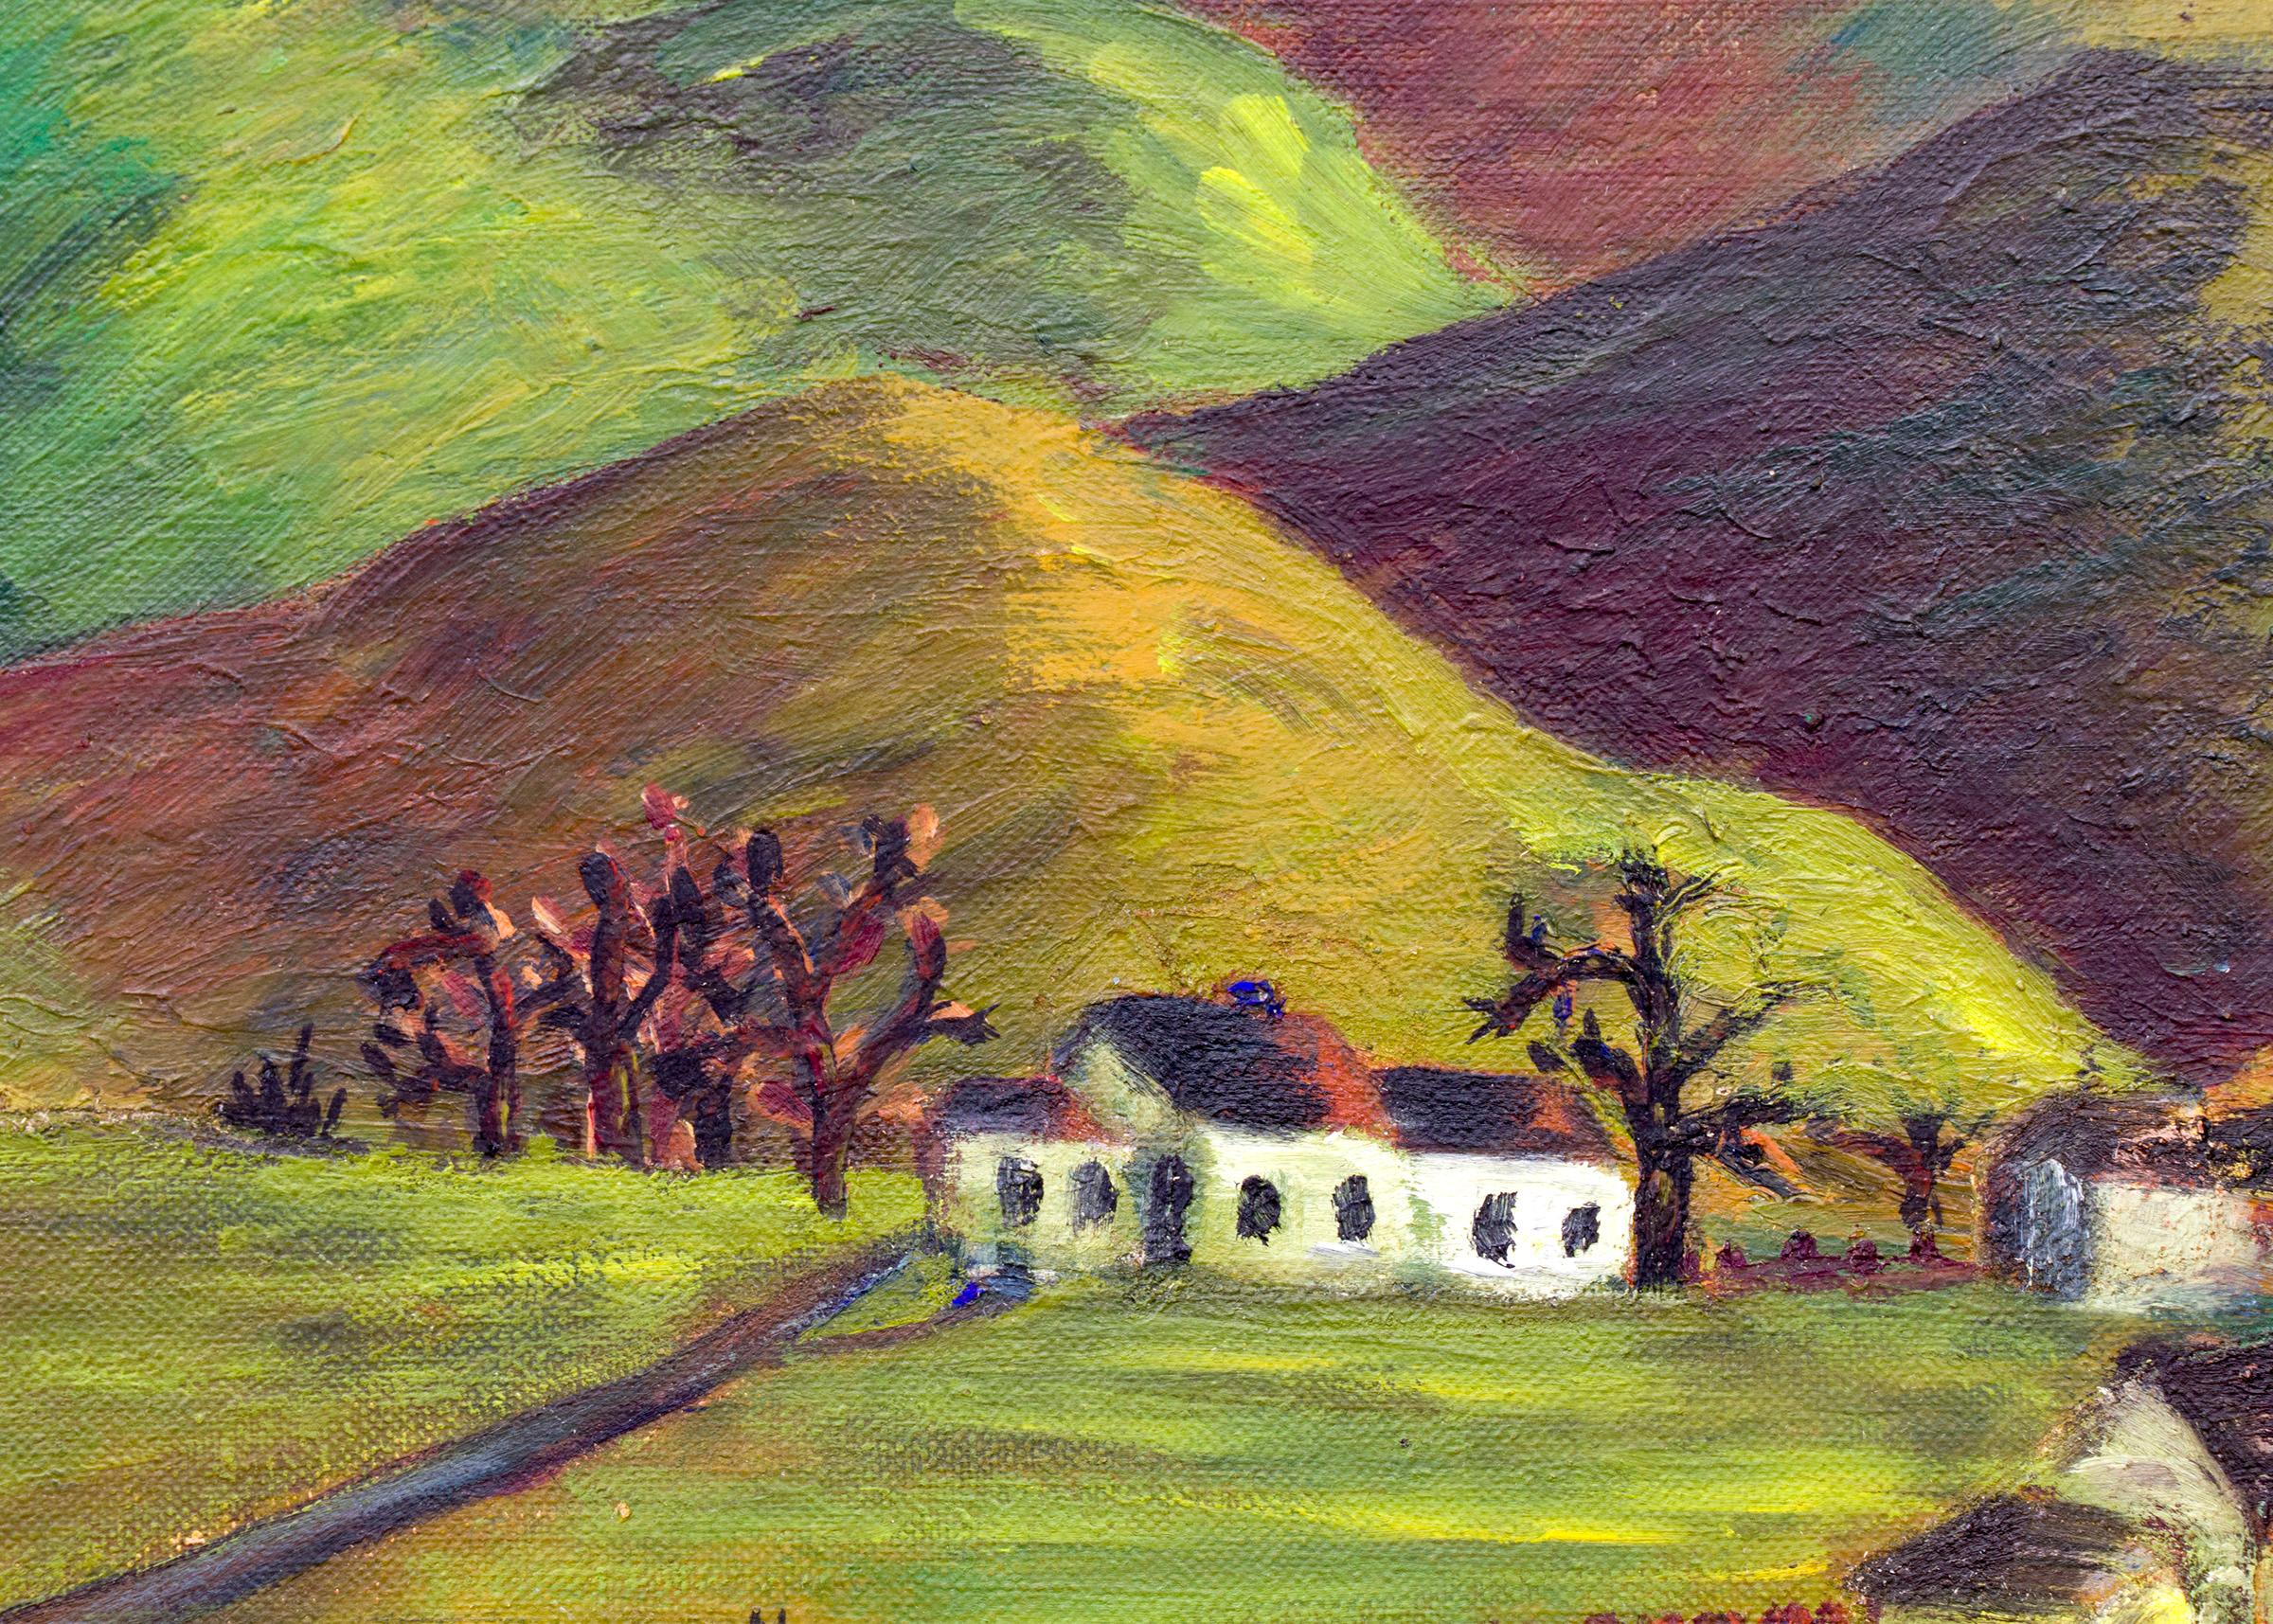 1940s modernist mountain landscape painting, near Gunnison, Colorado with a white farmhouse and out buldings and trees in a meadow/valley with mountains in the background. Painted in a somewhat primitive, naive, modernist style in colors of green,